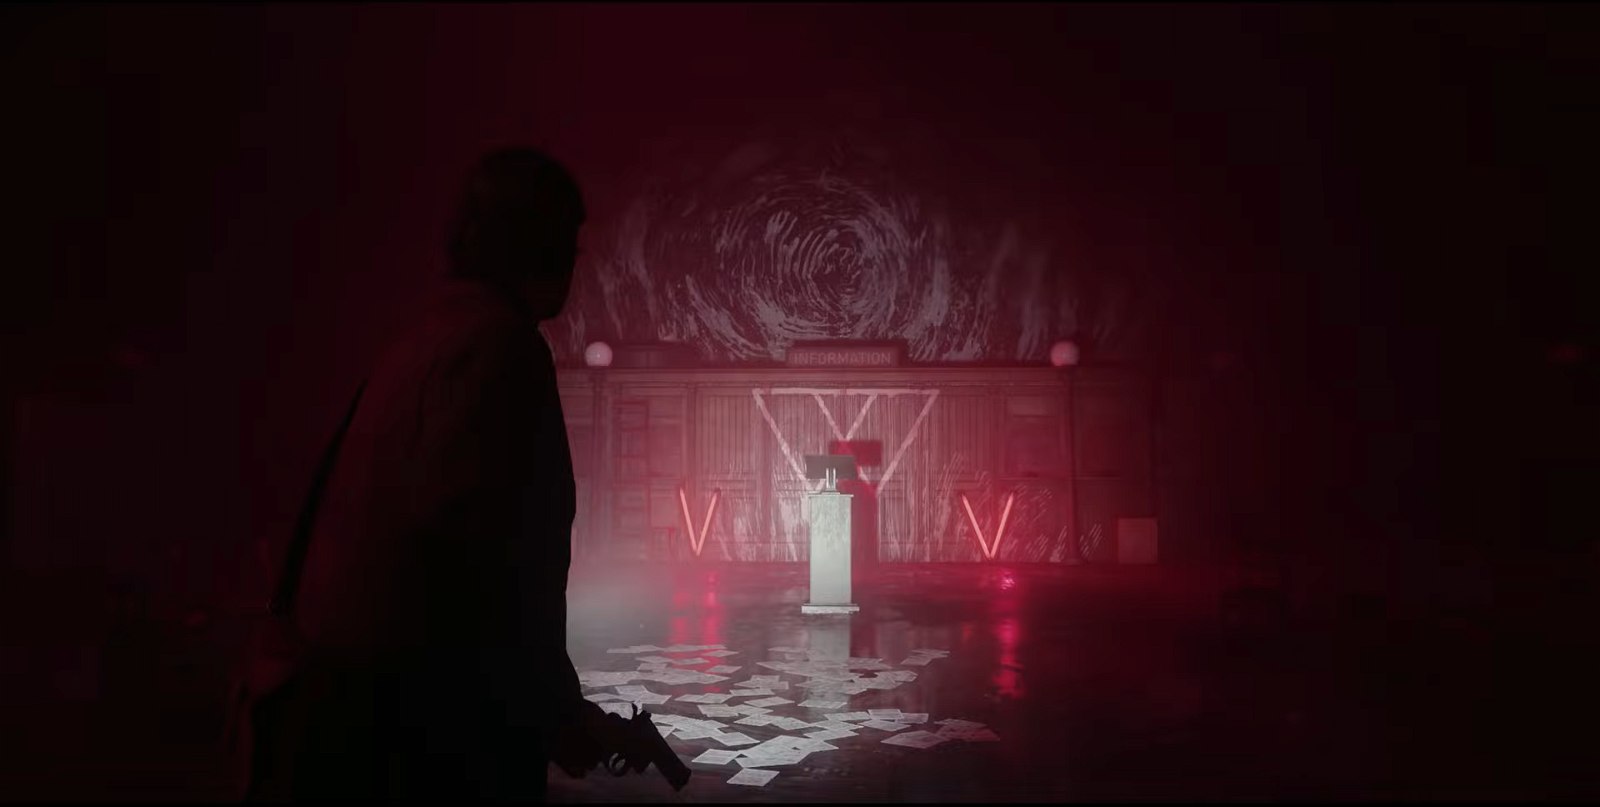 The ALAN WAKE 2 Trailer Will Blow The Minds Of ALAN WAKE Fans